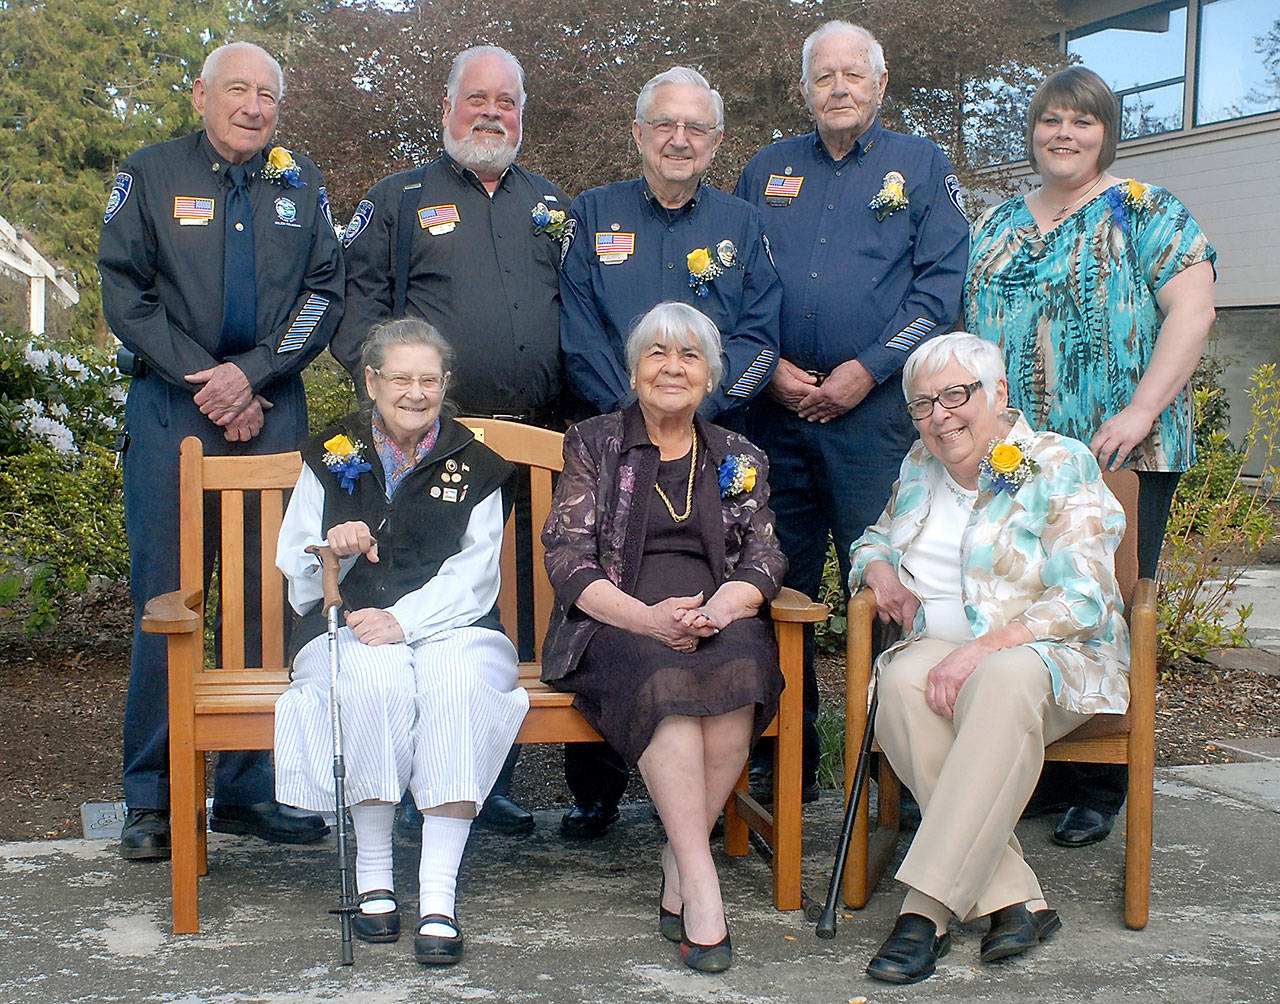 Clallam County Community Service Award winners gather prior to receiving their awards Thursday at Holy Trinity Lutheran Church in Port Angeles. Receiving awards were, front row from left, Jo Oliver, Dianna Cross and Mary Sherwood; and back row from left, Charles Devoney, Jim Walsh, Gary Marler, Bob Agee and Tammy Sullenger. (Keith Thorpe/Peninsula Daily News)